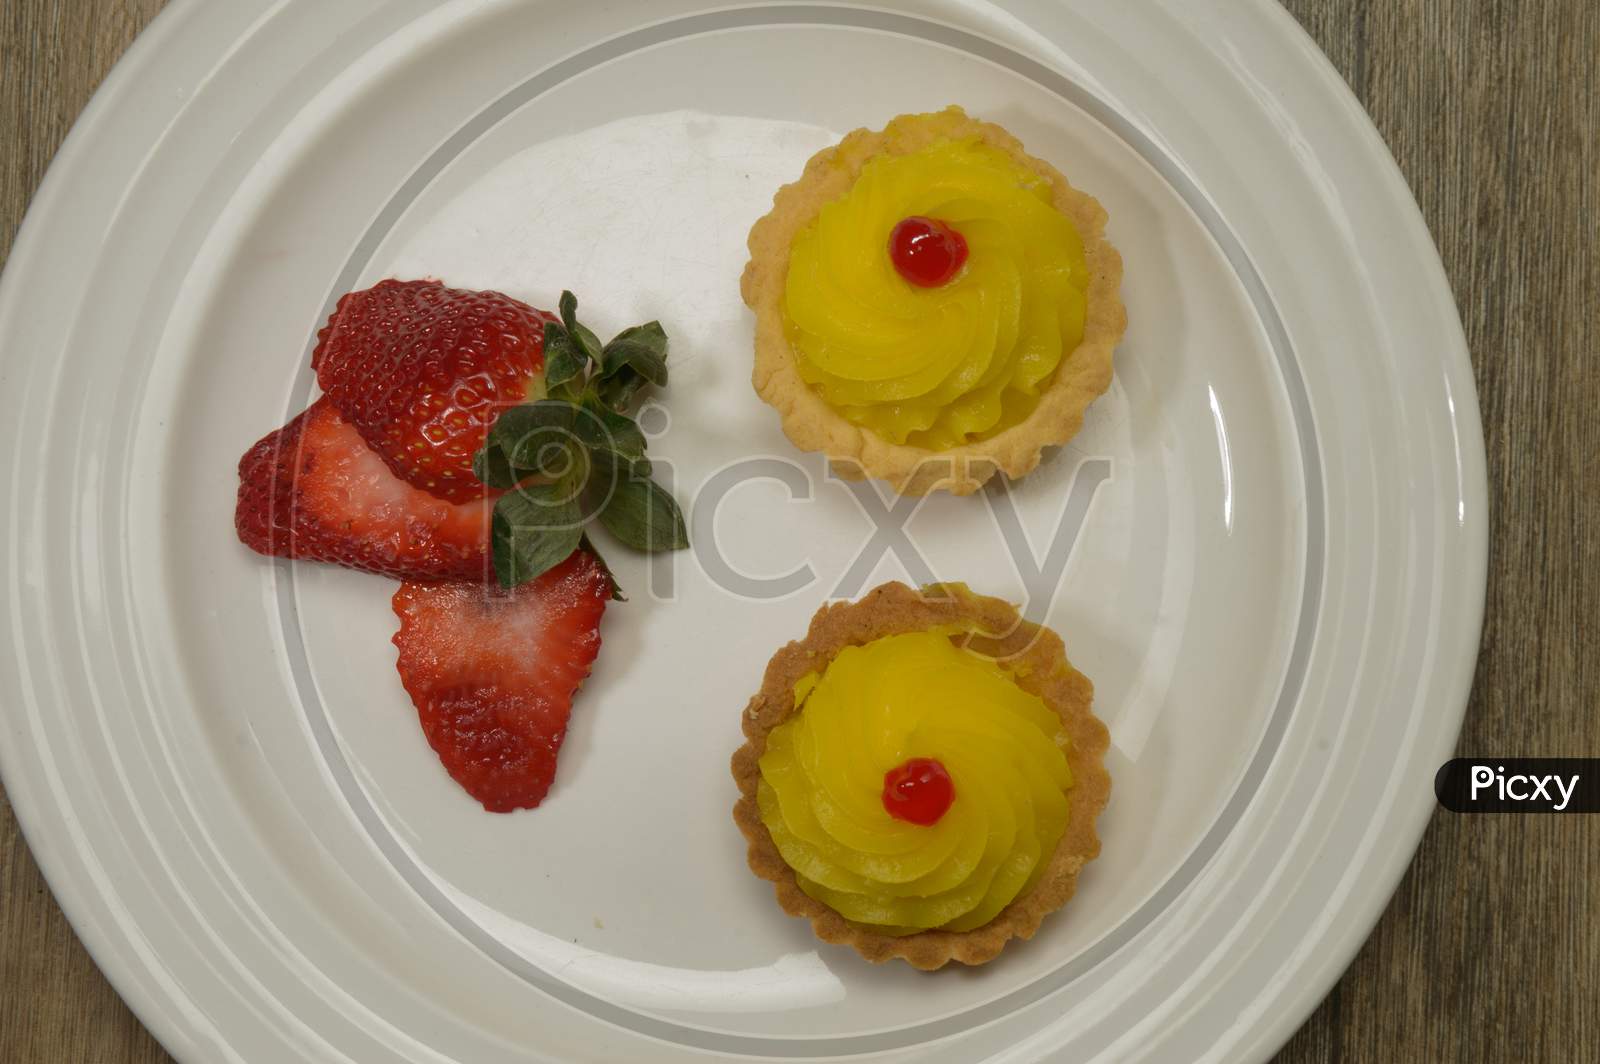 Tasty Strawberry Indian Cupcake With Cherry On The Top Decorated On White Plate